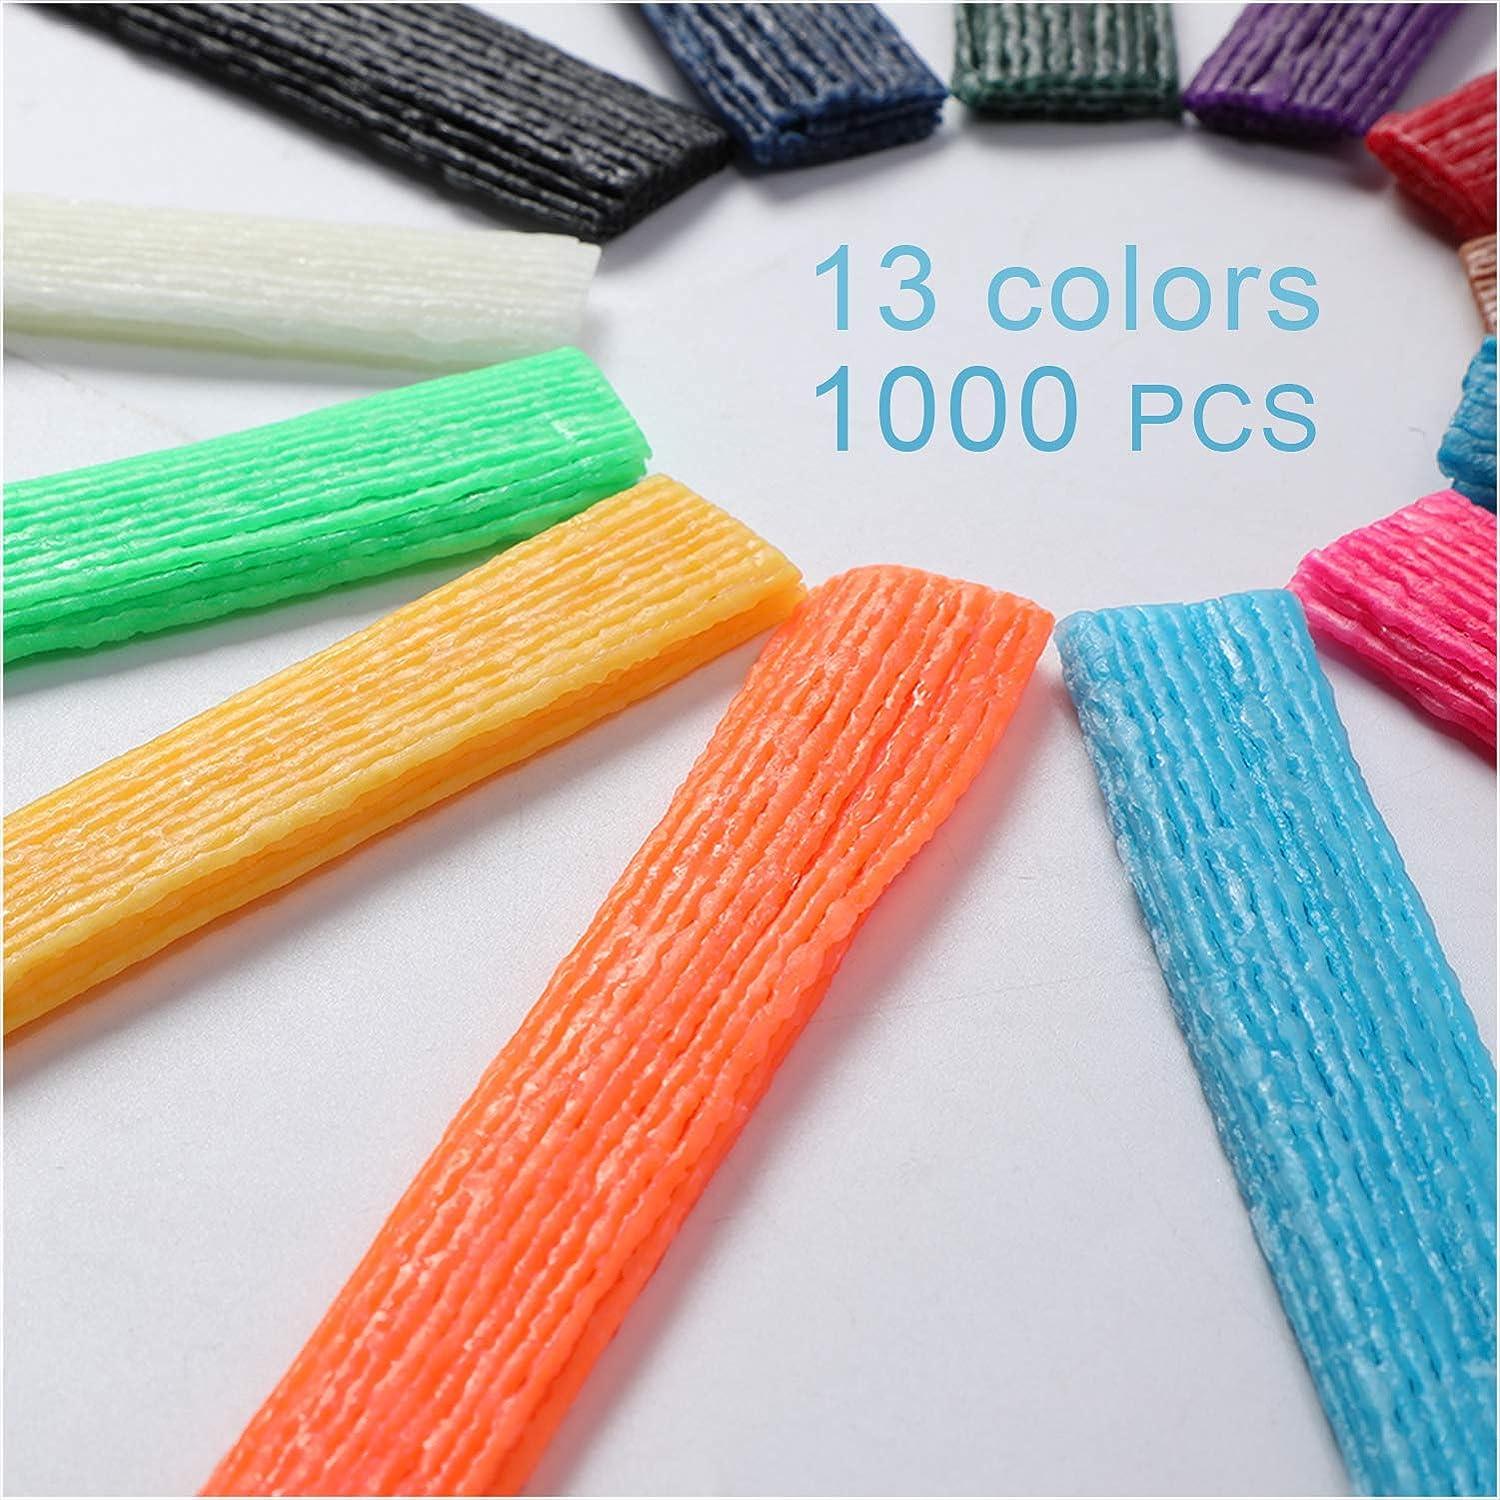 UPINS 1000pcs Wax Craft Sticks Bendable Sticky Wax Yarn Sticks in 13 Colors with Blue Storage Bag for Kids DIY Art Supplies